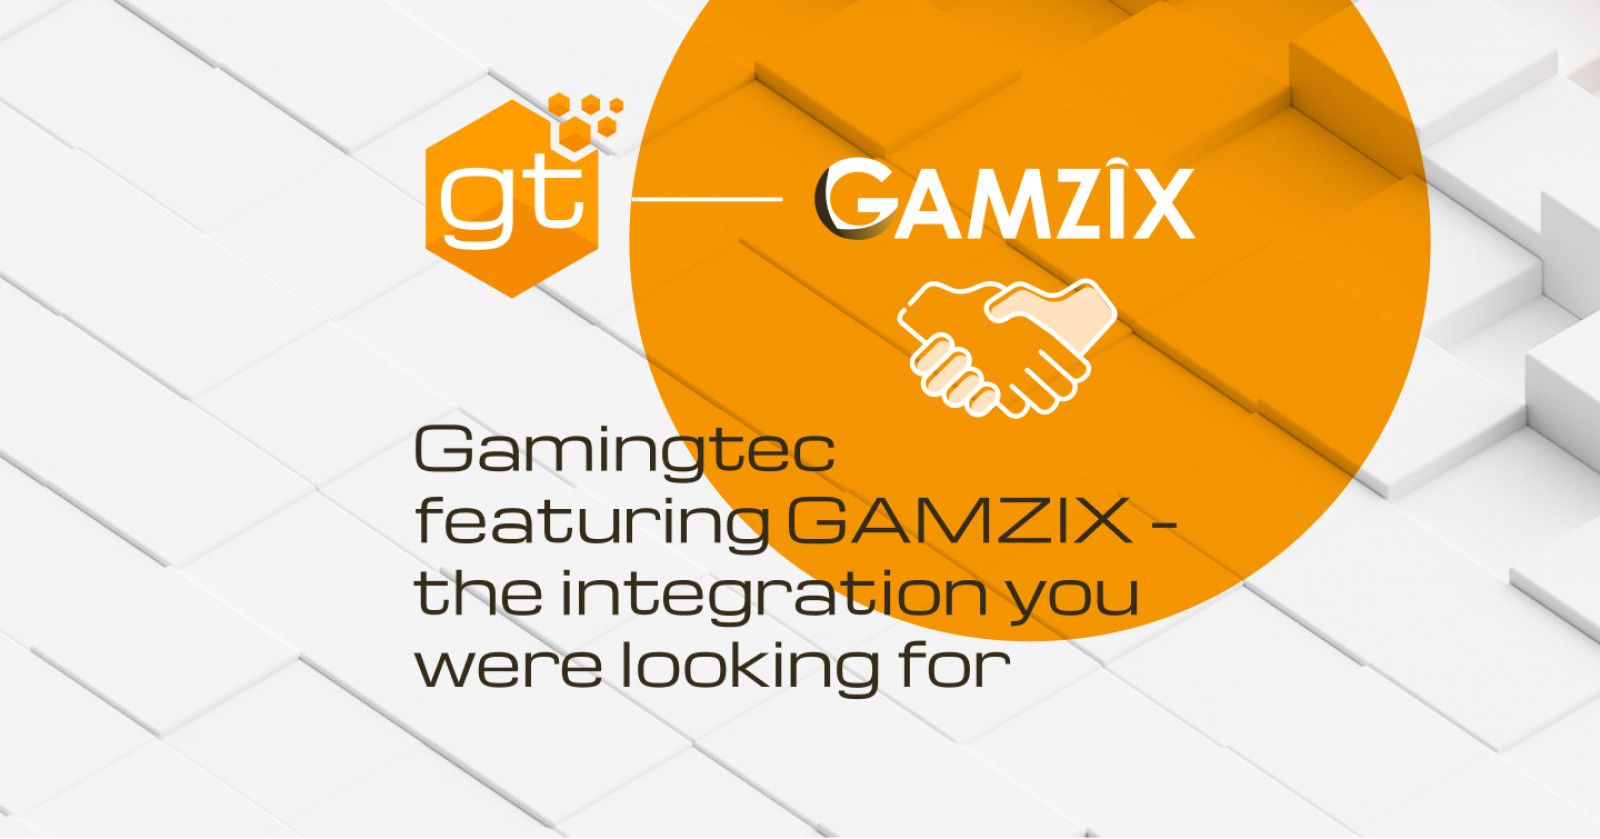 Gamingtec featuring GAMZIX – the integration you were looking for